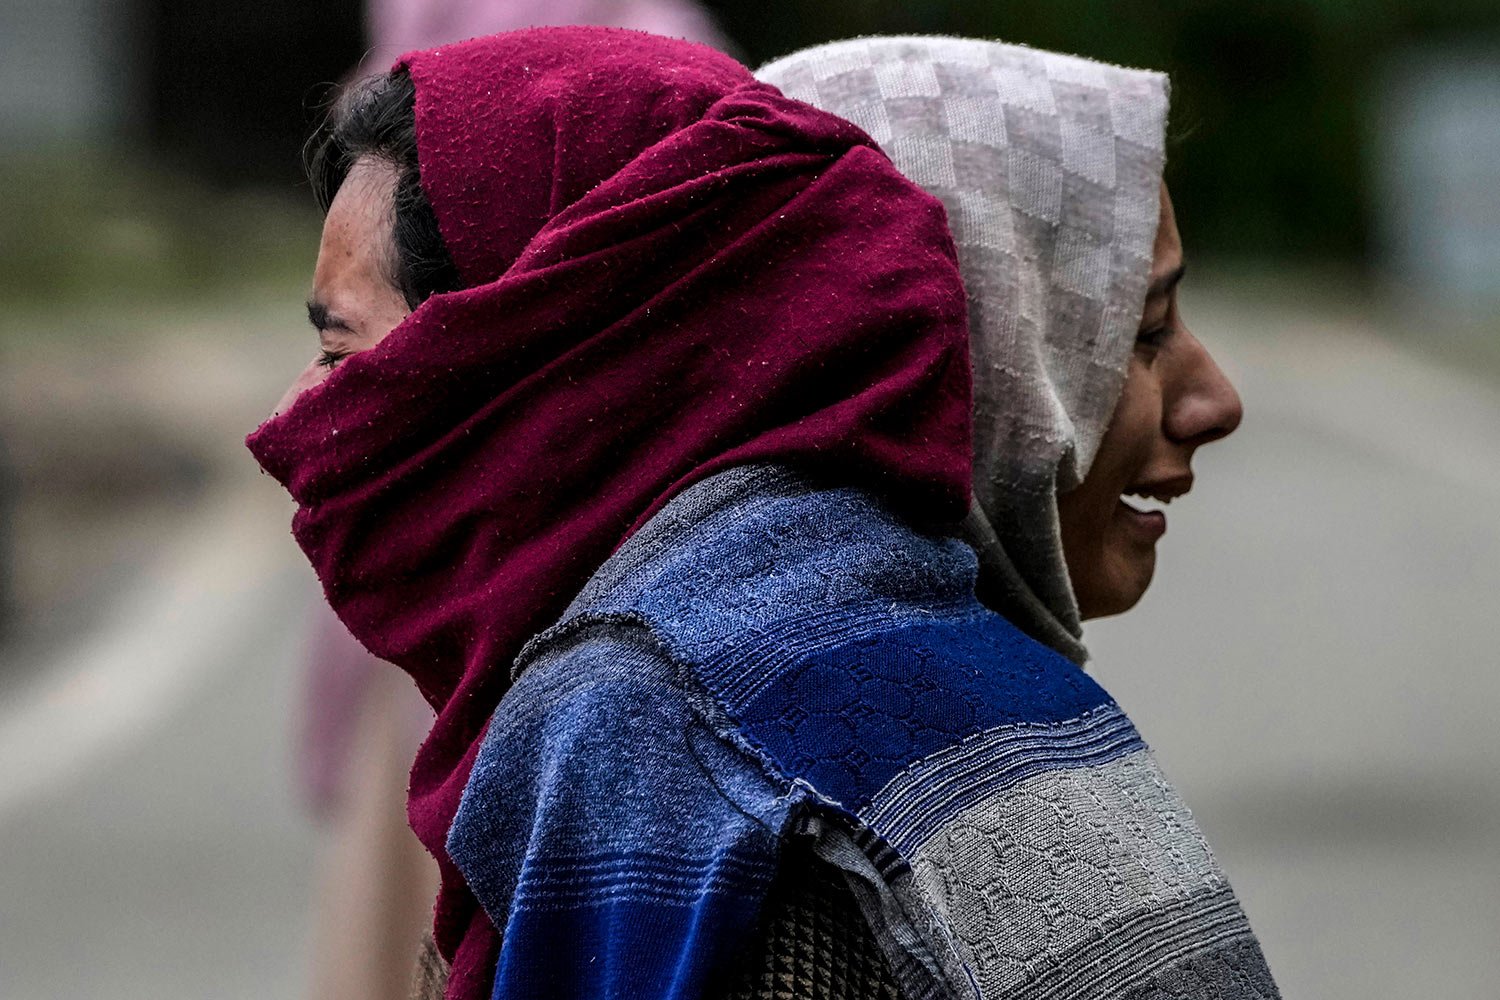  Two Kashmiri women cry after their house was damaged in a gun-battle between government forces and suspected rebels in Malwah village, north of Srinagar, Indian controlled Kashmir, Thursday, April 21, 2022. (AP Photo/Mukhtar Khan) 